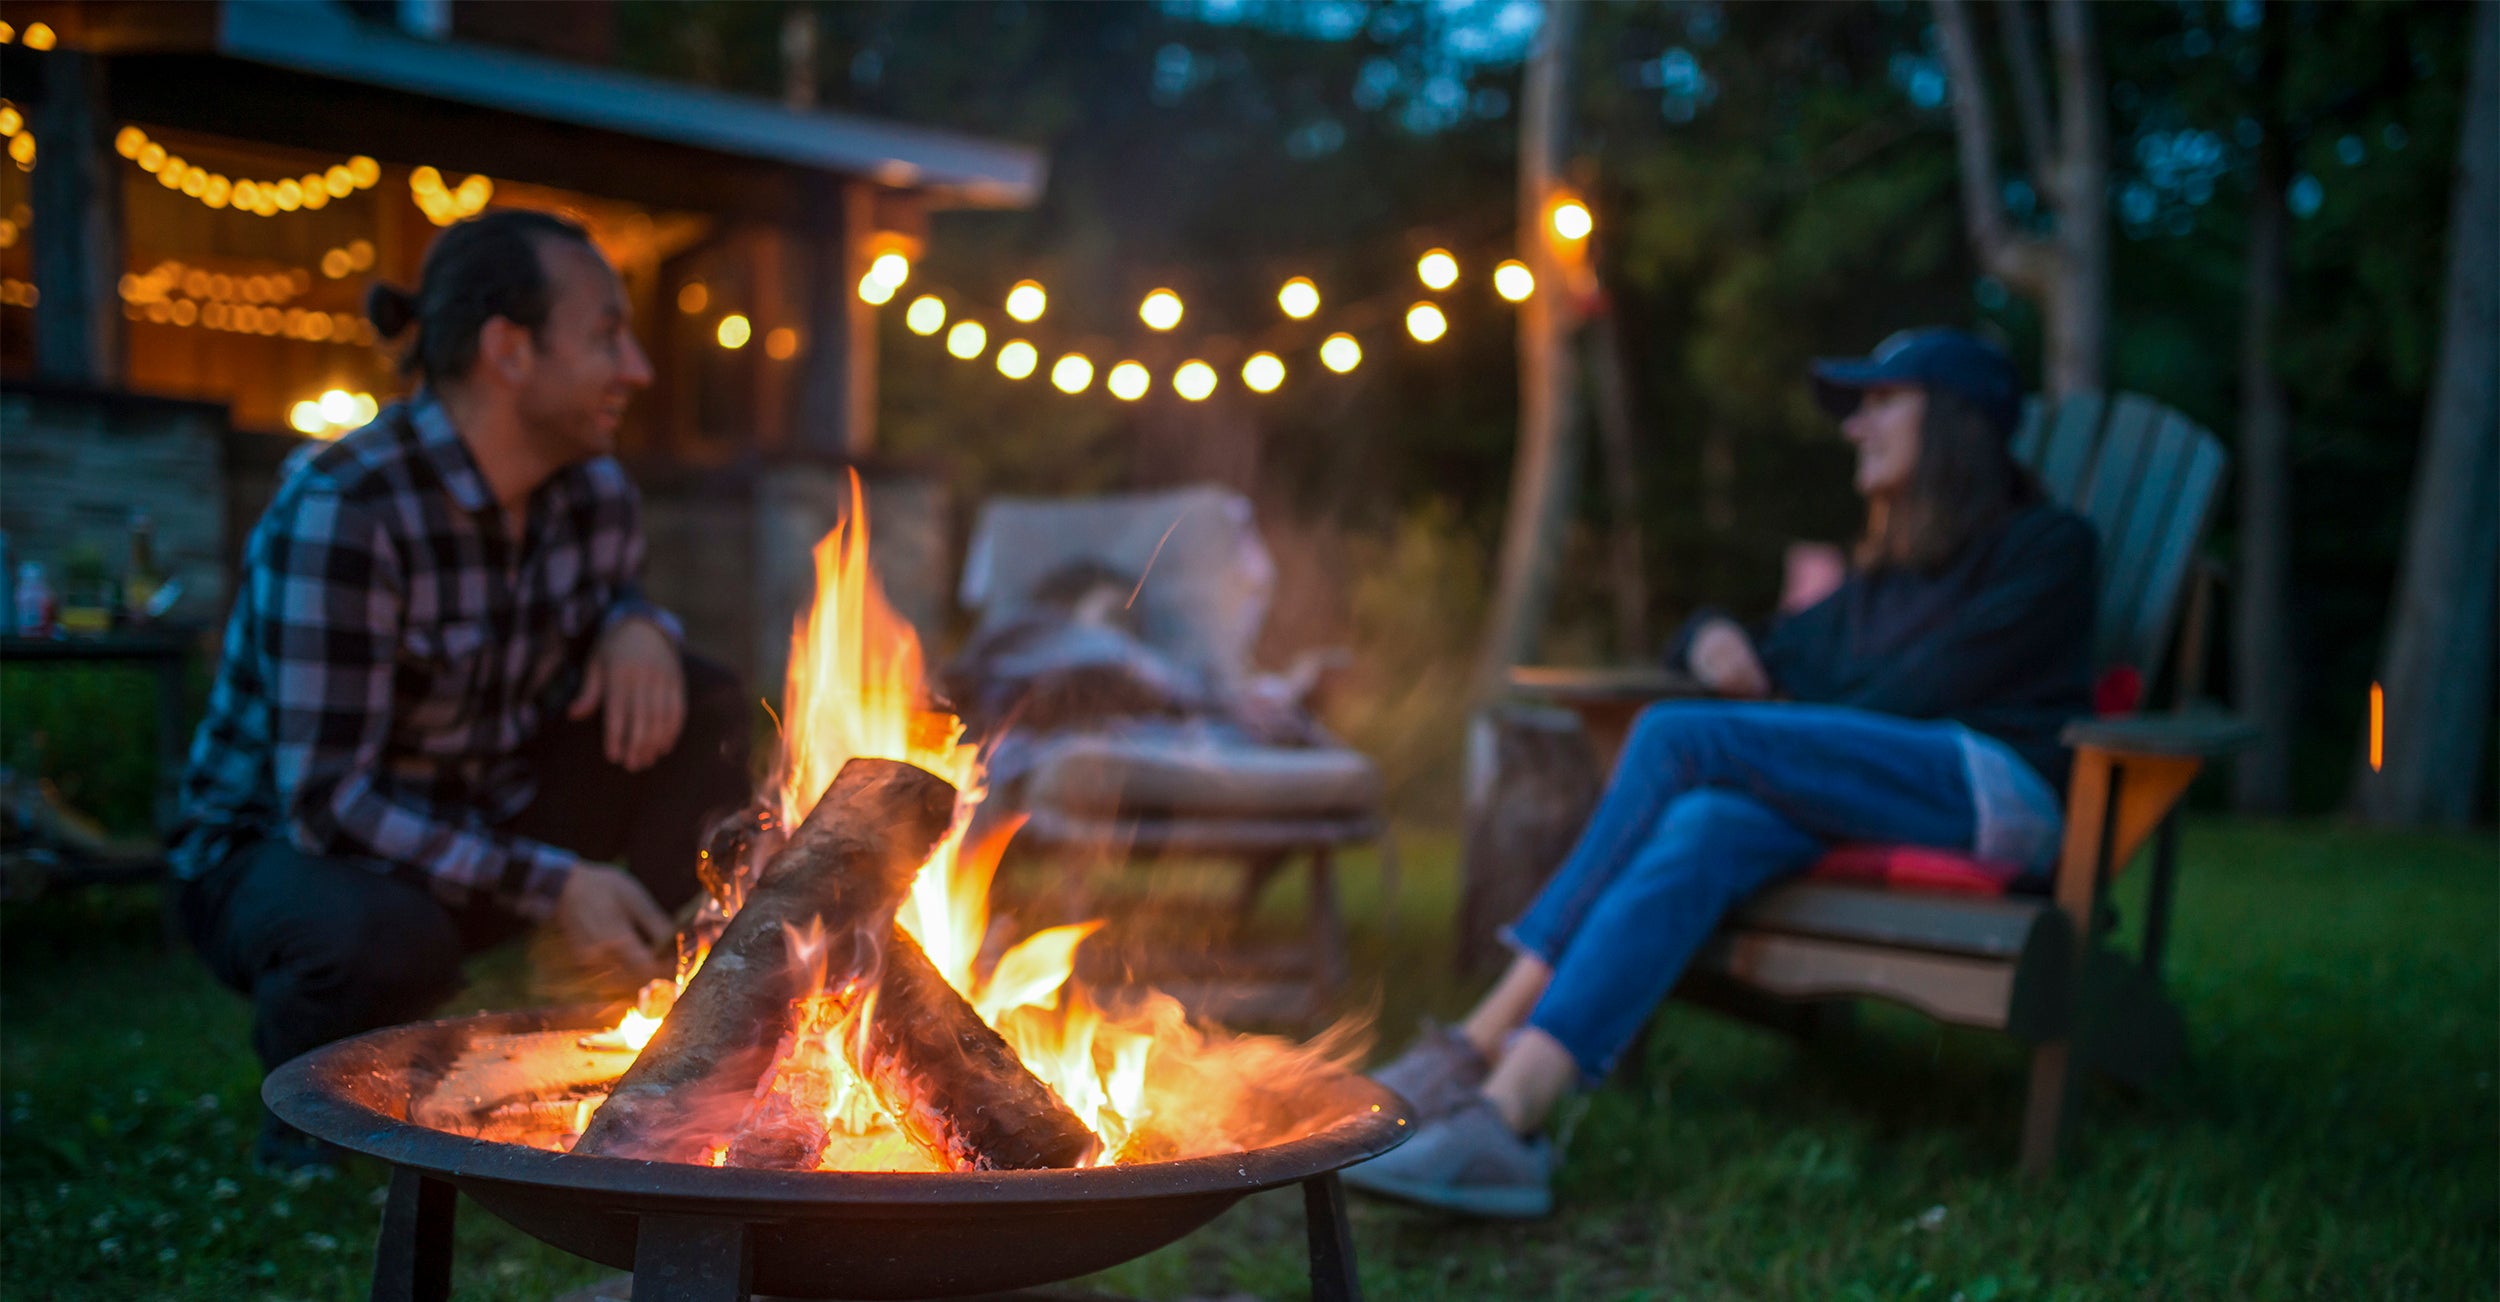 Outdoor Fire Pits Buying Guide | BJ's Wholesale Club - Official Blog